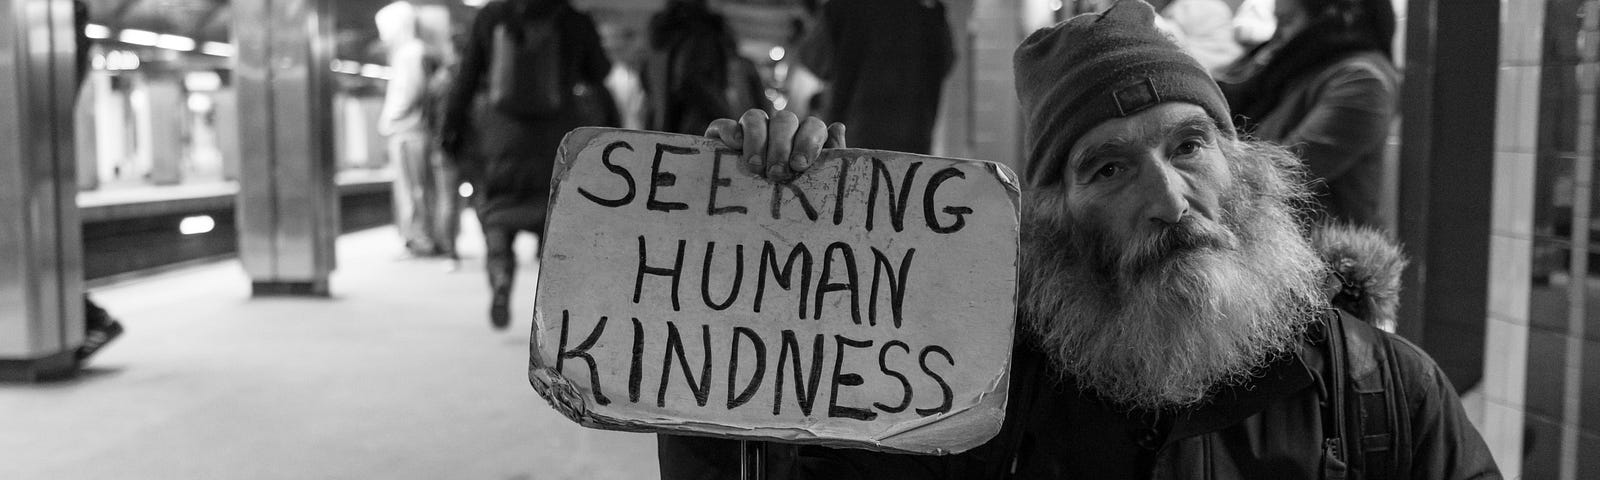 pic shows a homeless man holding a sign that says “ Seeking Human Kindness”